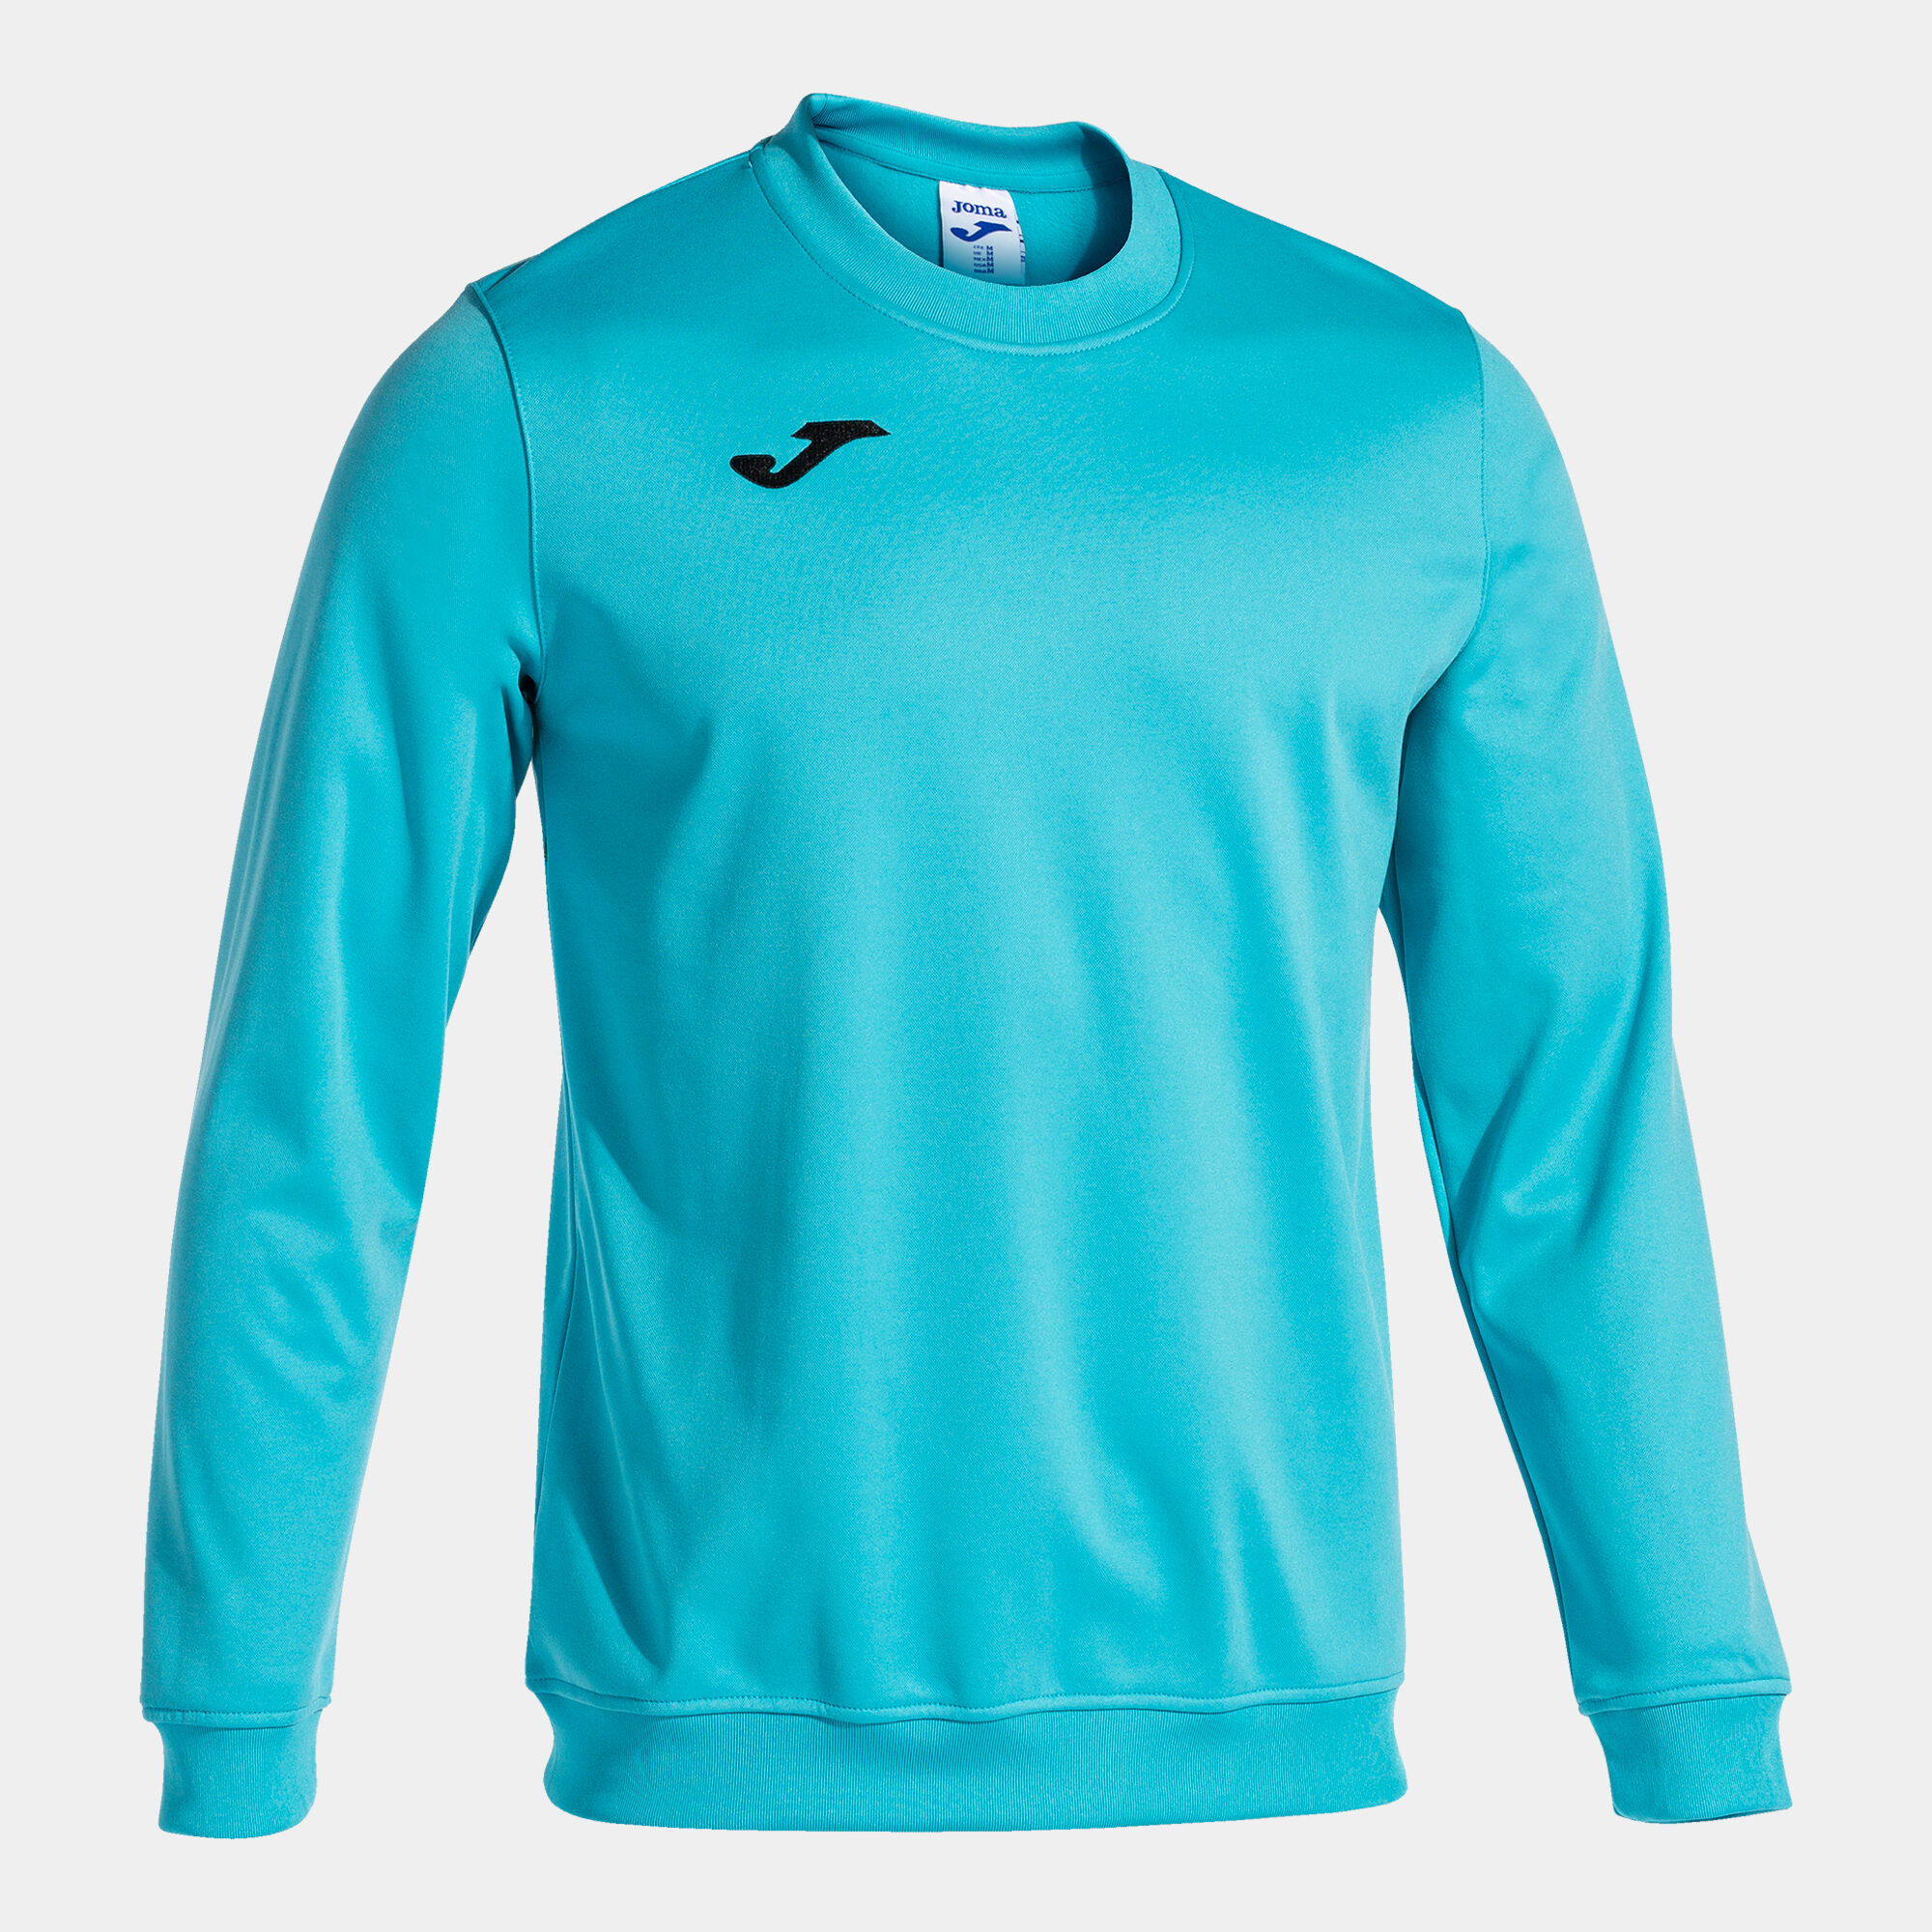 Sweat-shirt homme Cairo II turquoise fluo